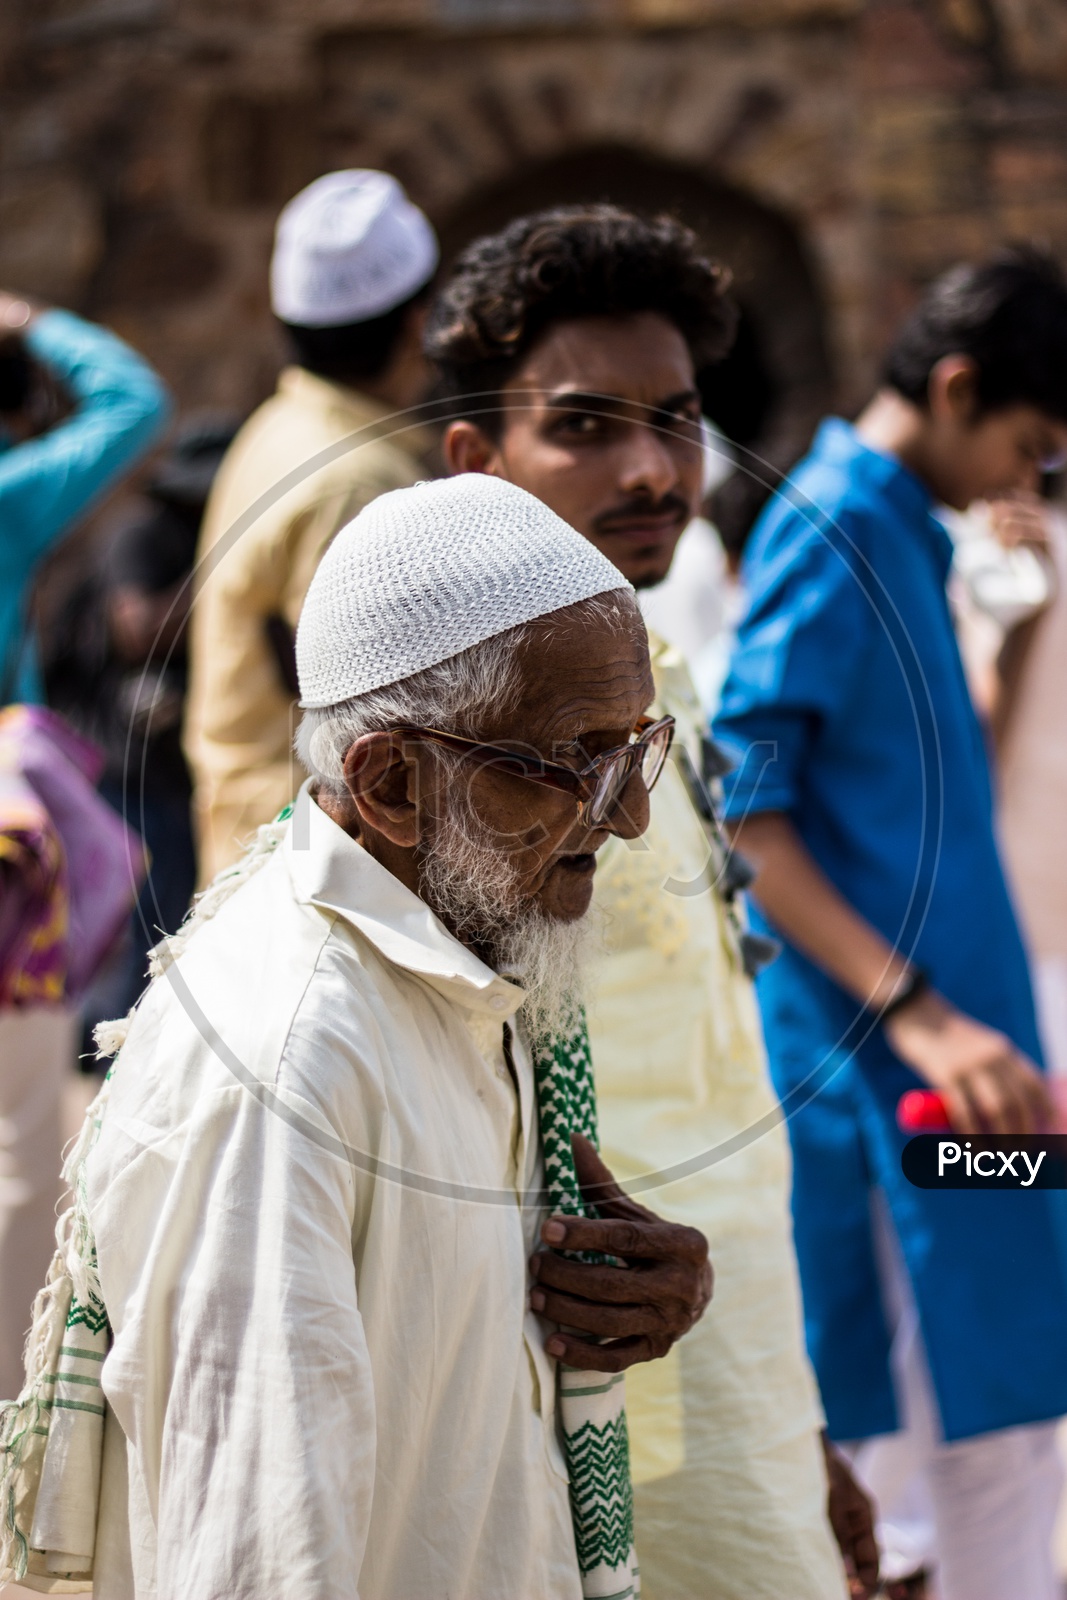 An old man at mosque during namaz or prayers at a mosque in Delhi